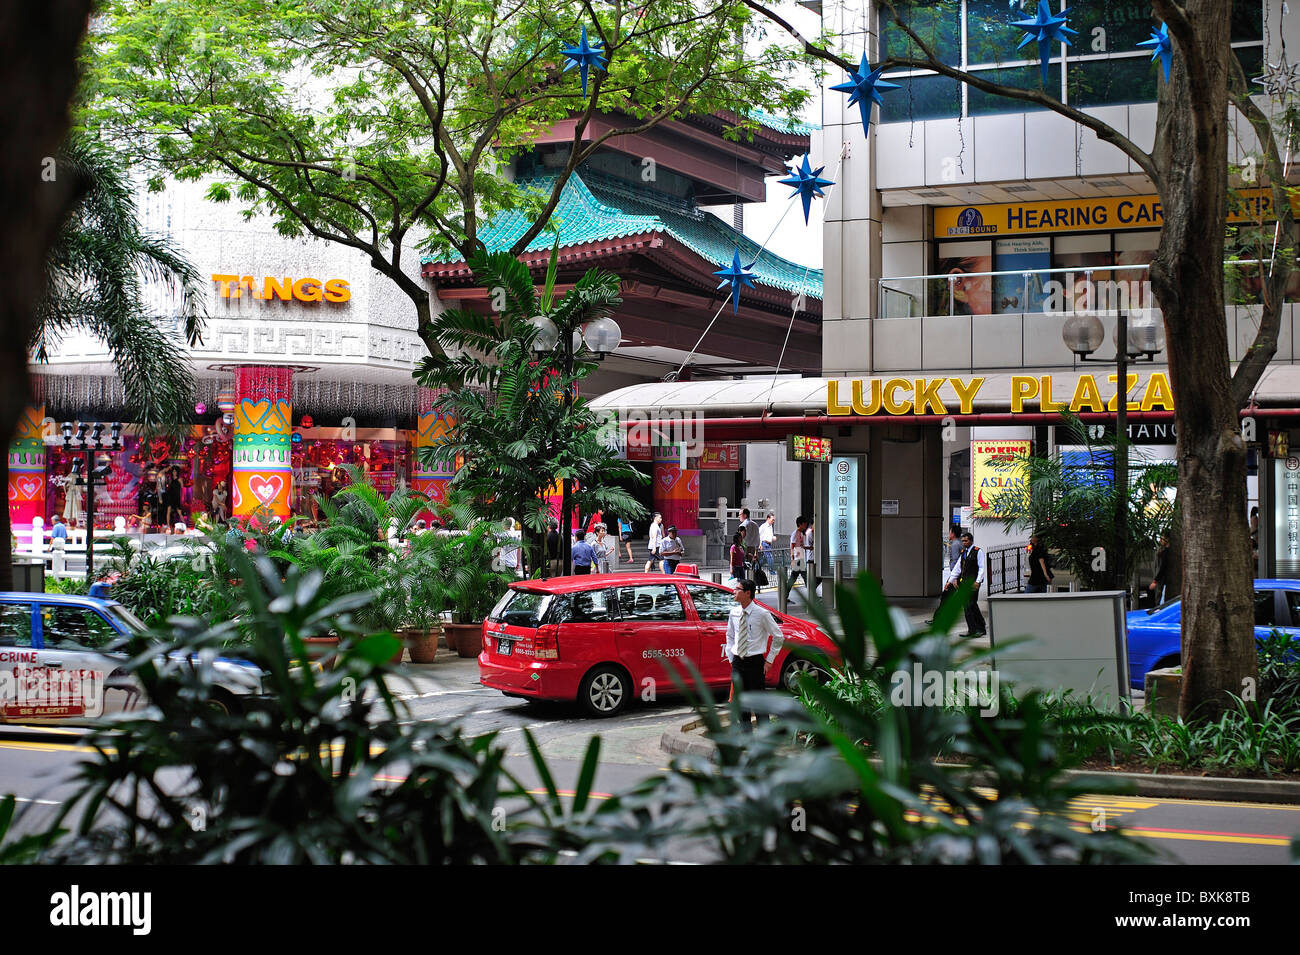 Orchard Road Singapur Tangs Lucky Plaza Stockfoto